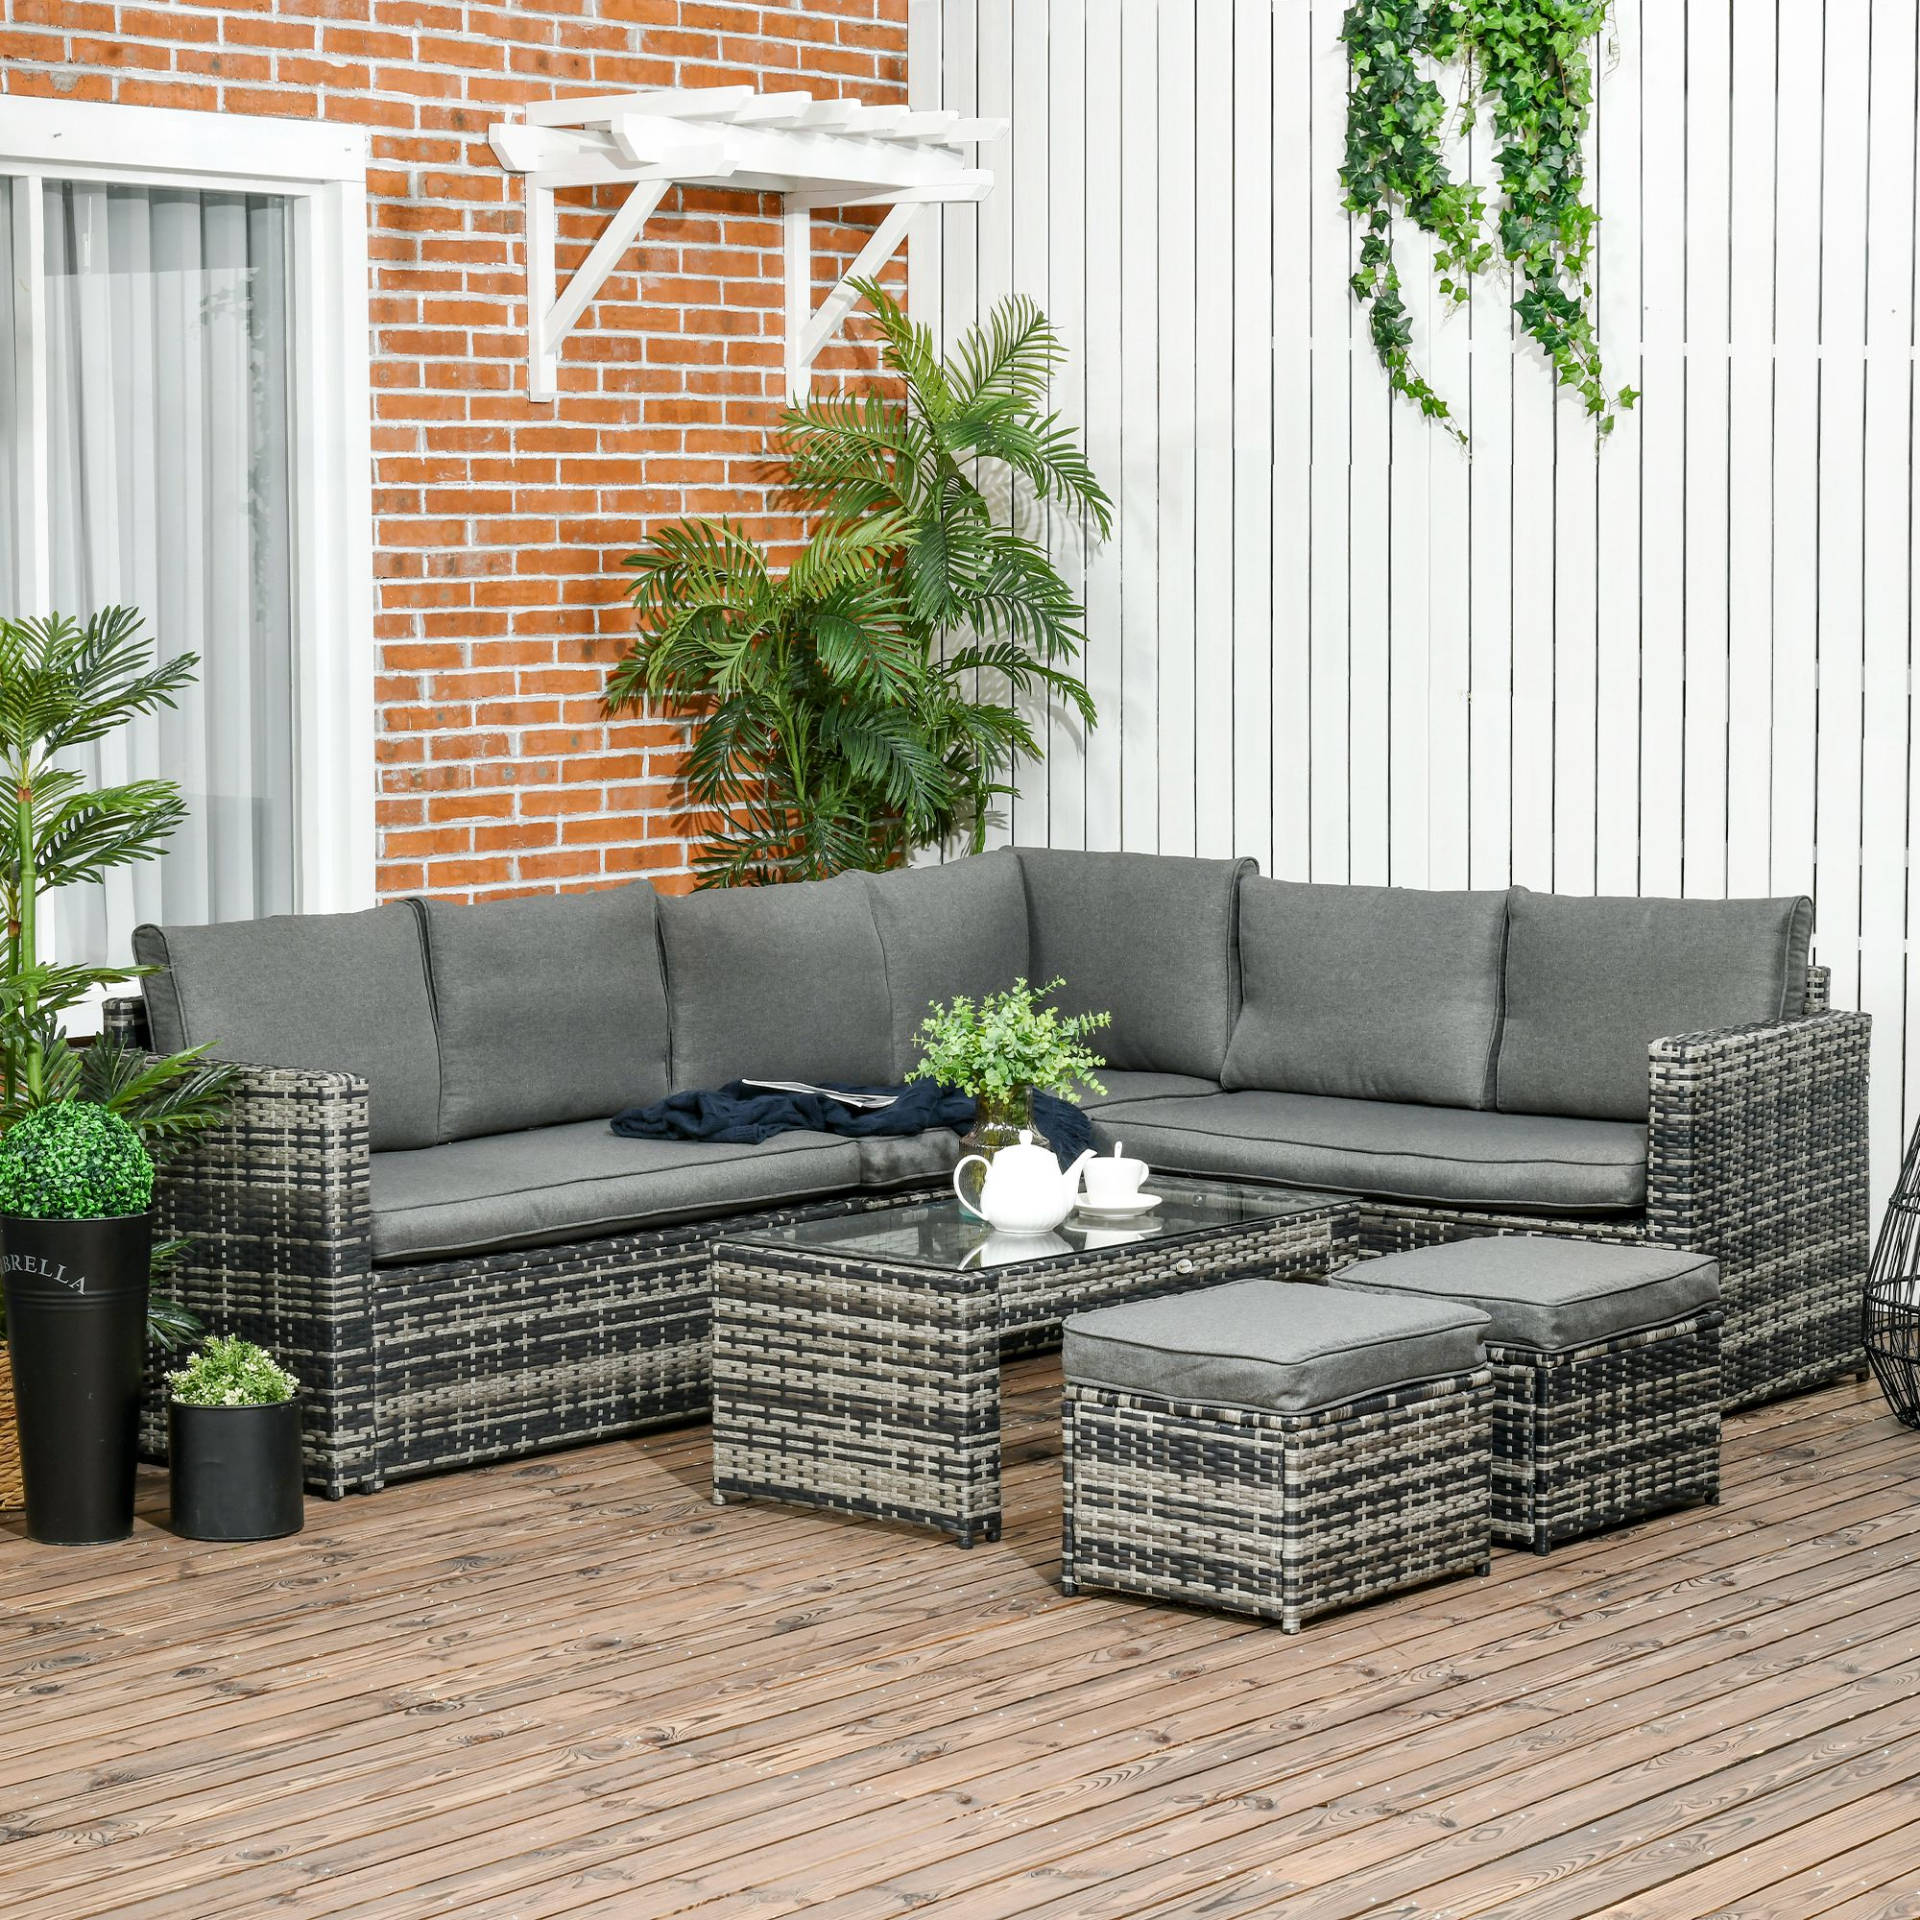 Outsunny 6 Piece Rattan Garden Furniture Set, 8-Seater Outdoor Sofa Sectional with 3 Loveseat Wicker Sofa with Cushions, 2 Footstools and Glass Table for Yard, Poolside, Grey